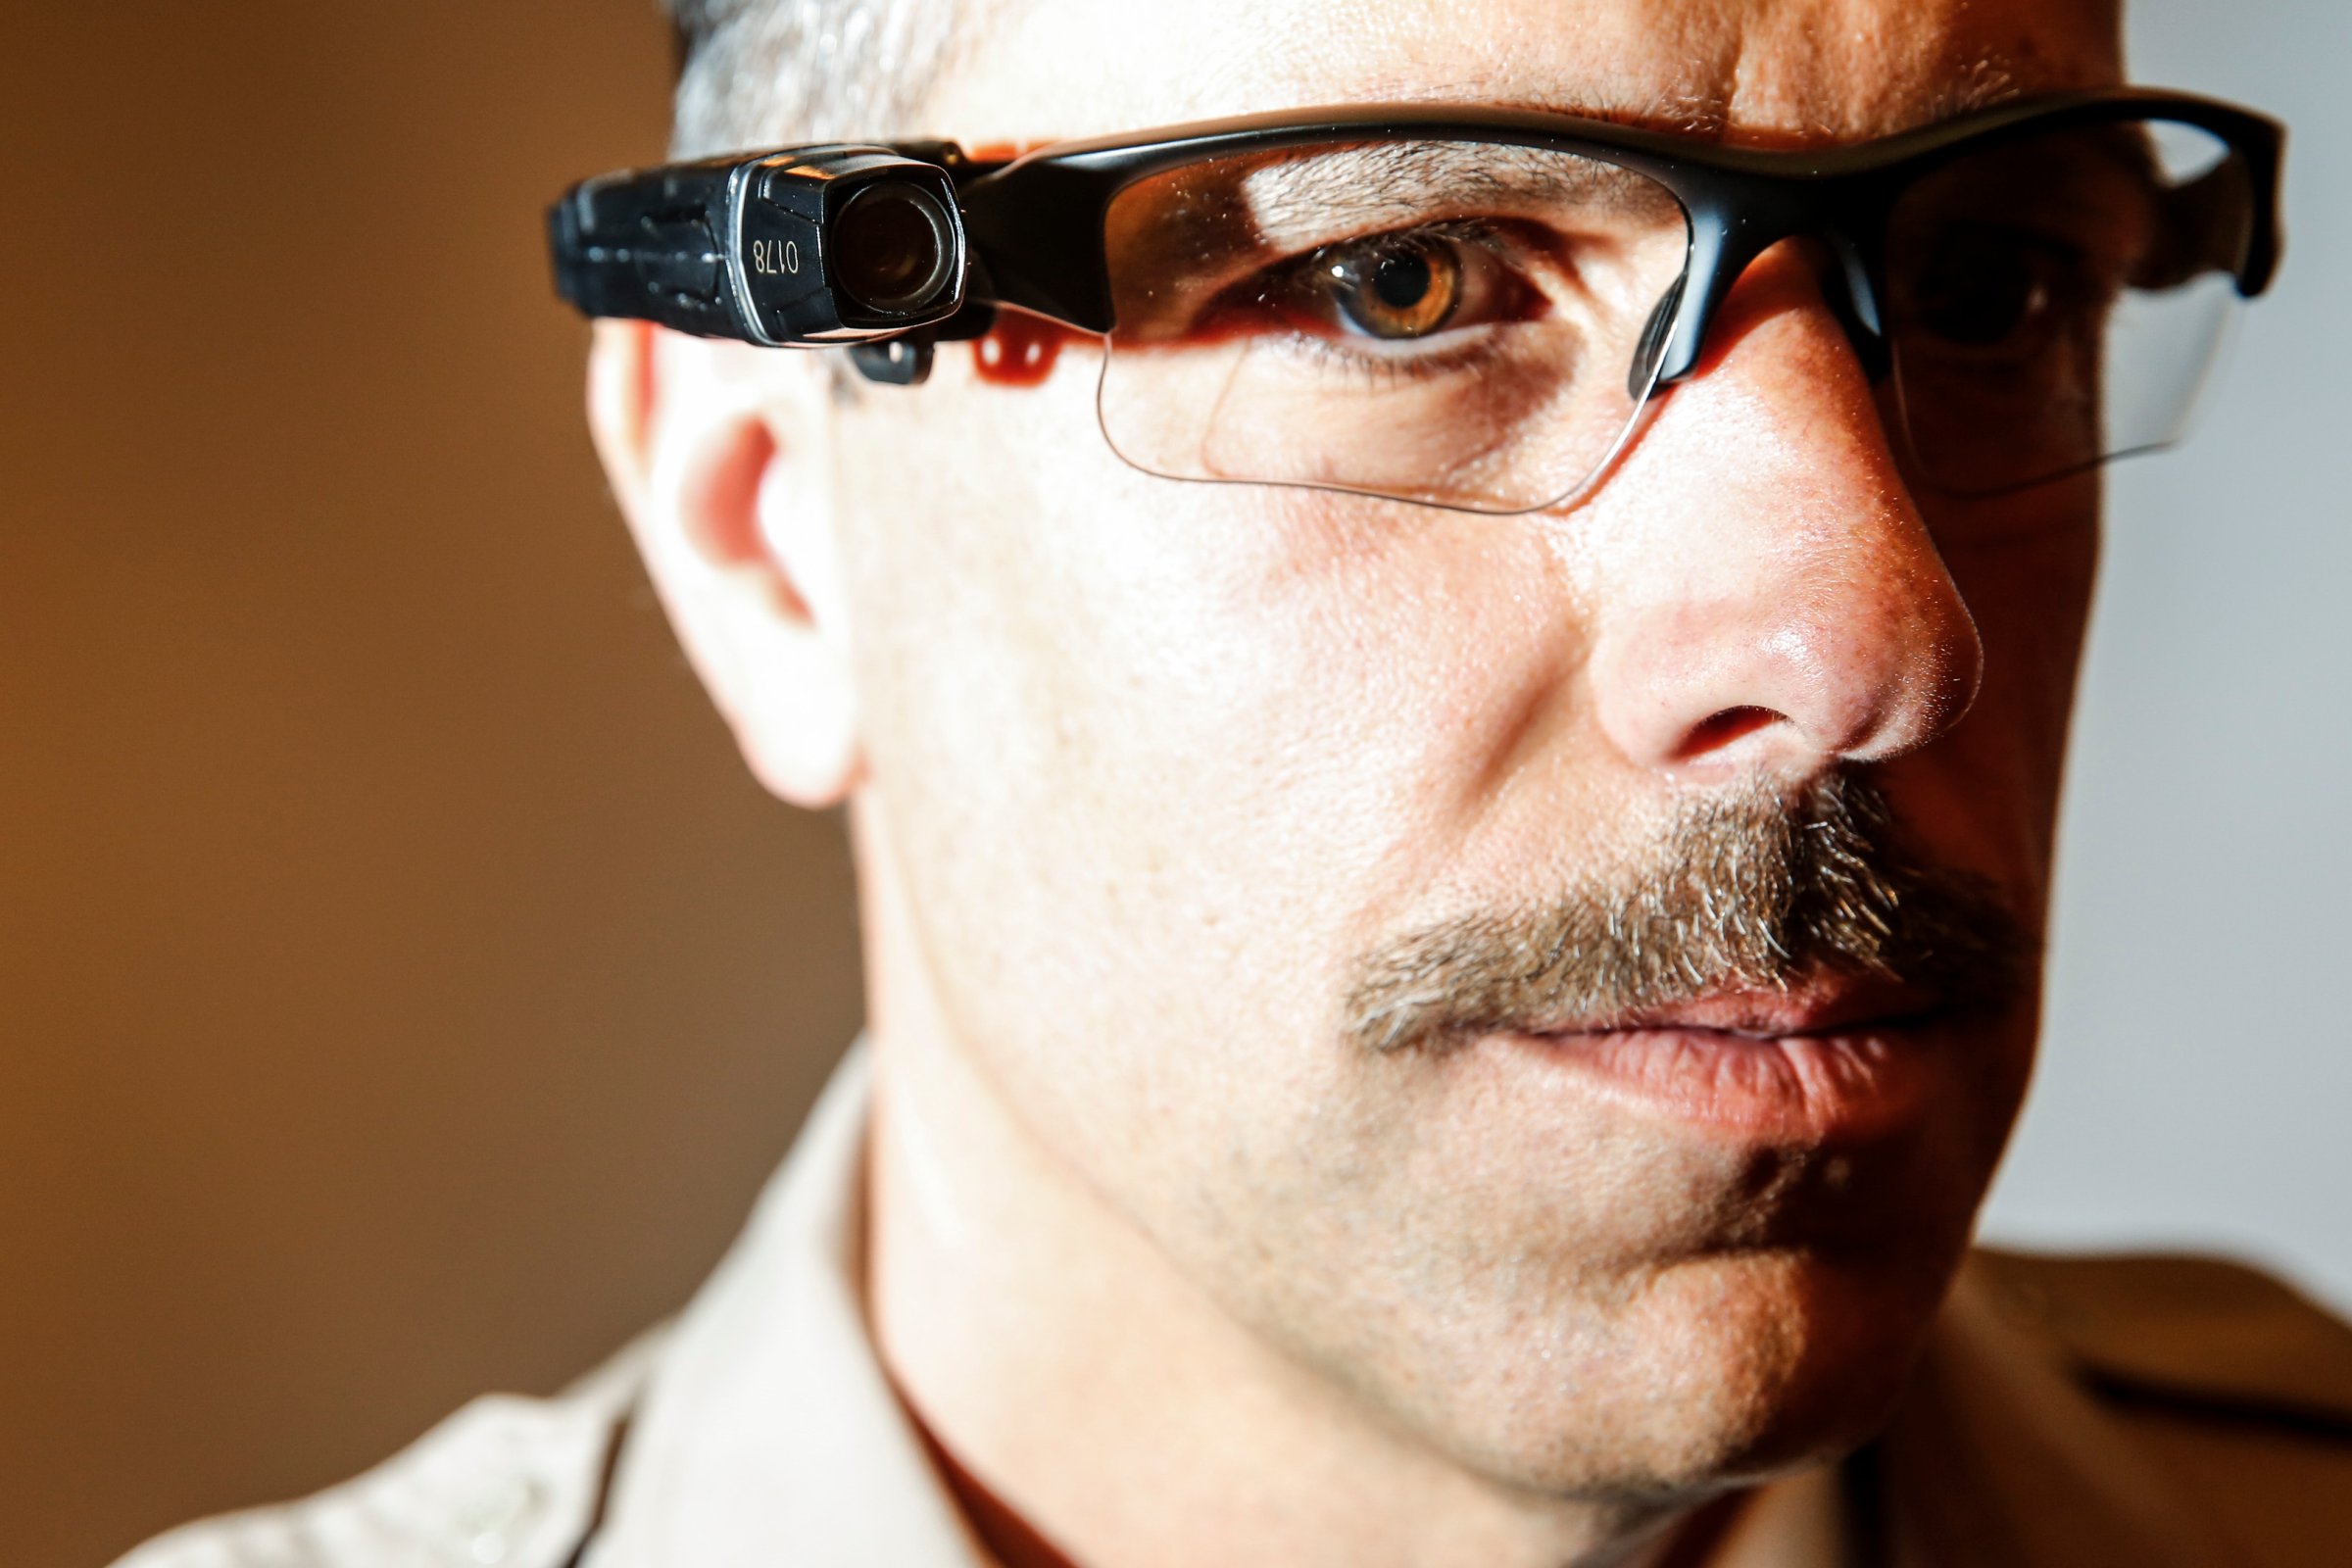 County of Los Angeles Sheriff's Lt. Chris Marks poses wearing the Taser Axon Flex, on-officer camera system attached to glasses in Monterey Park on Sept. 17, 2014.